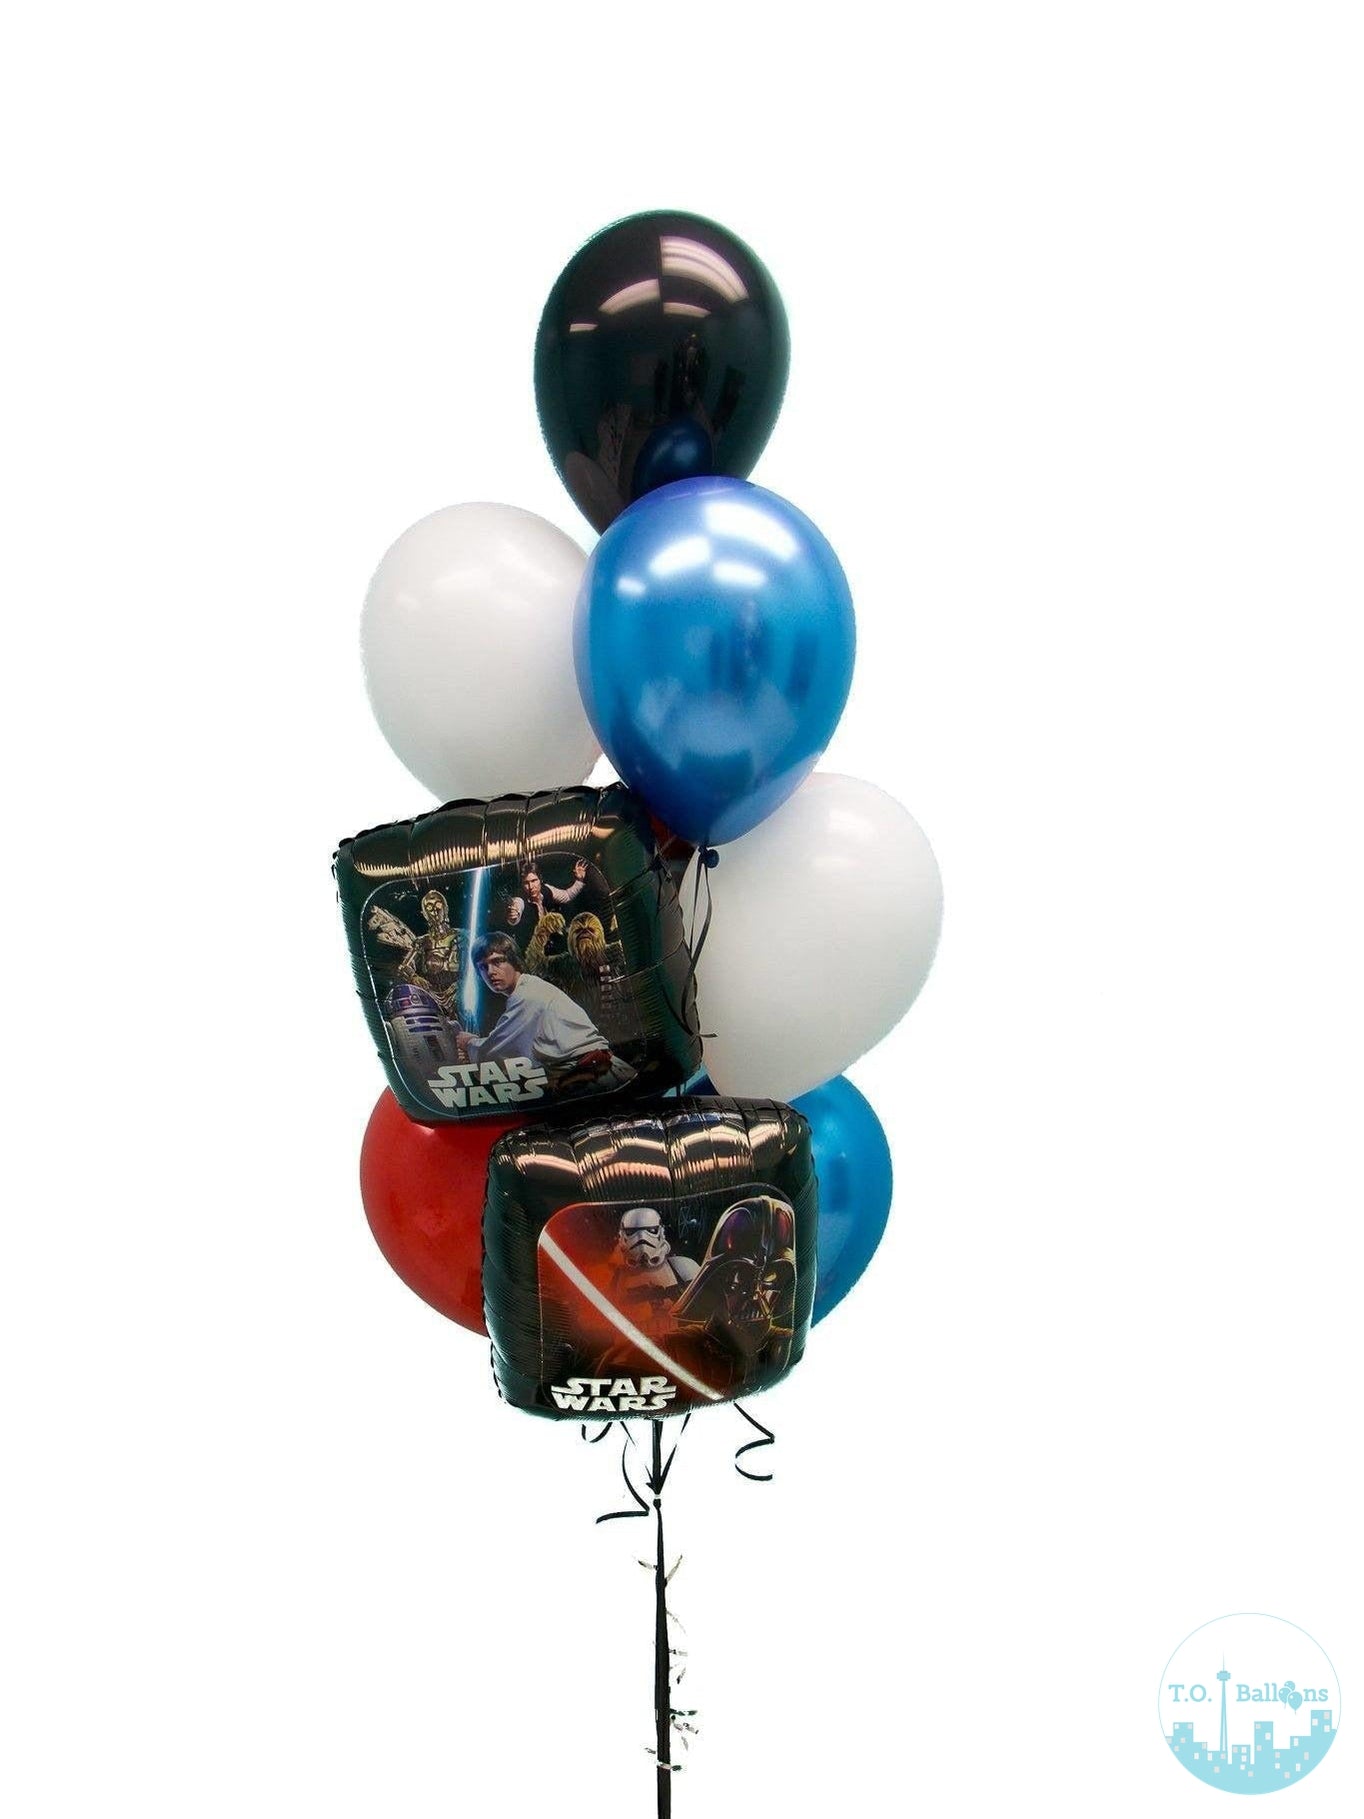 MAY THE FORCE BE WITH YOU JUMBO BOUQUET T.O. Balloons 